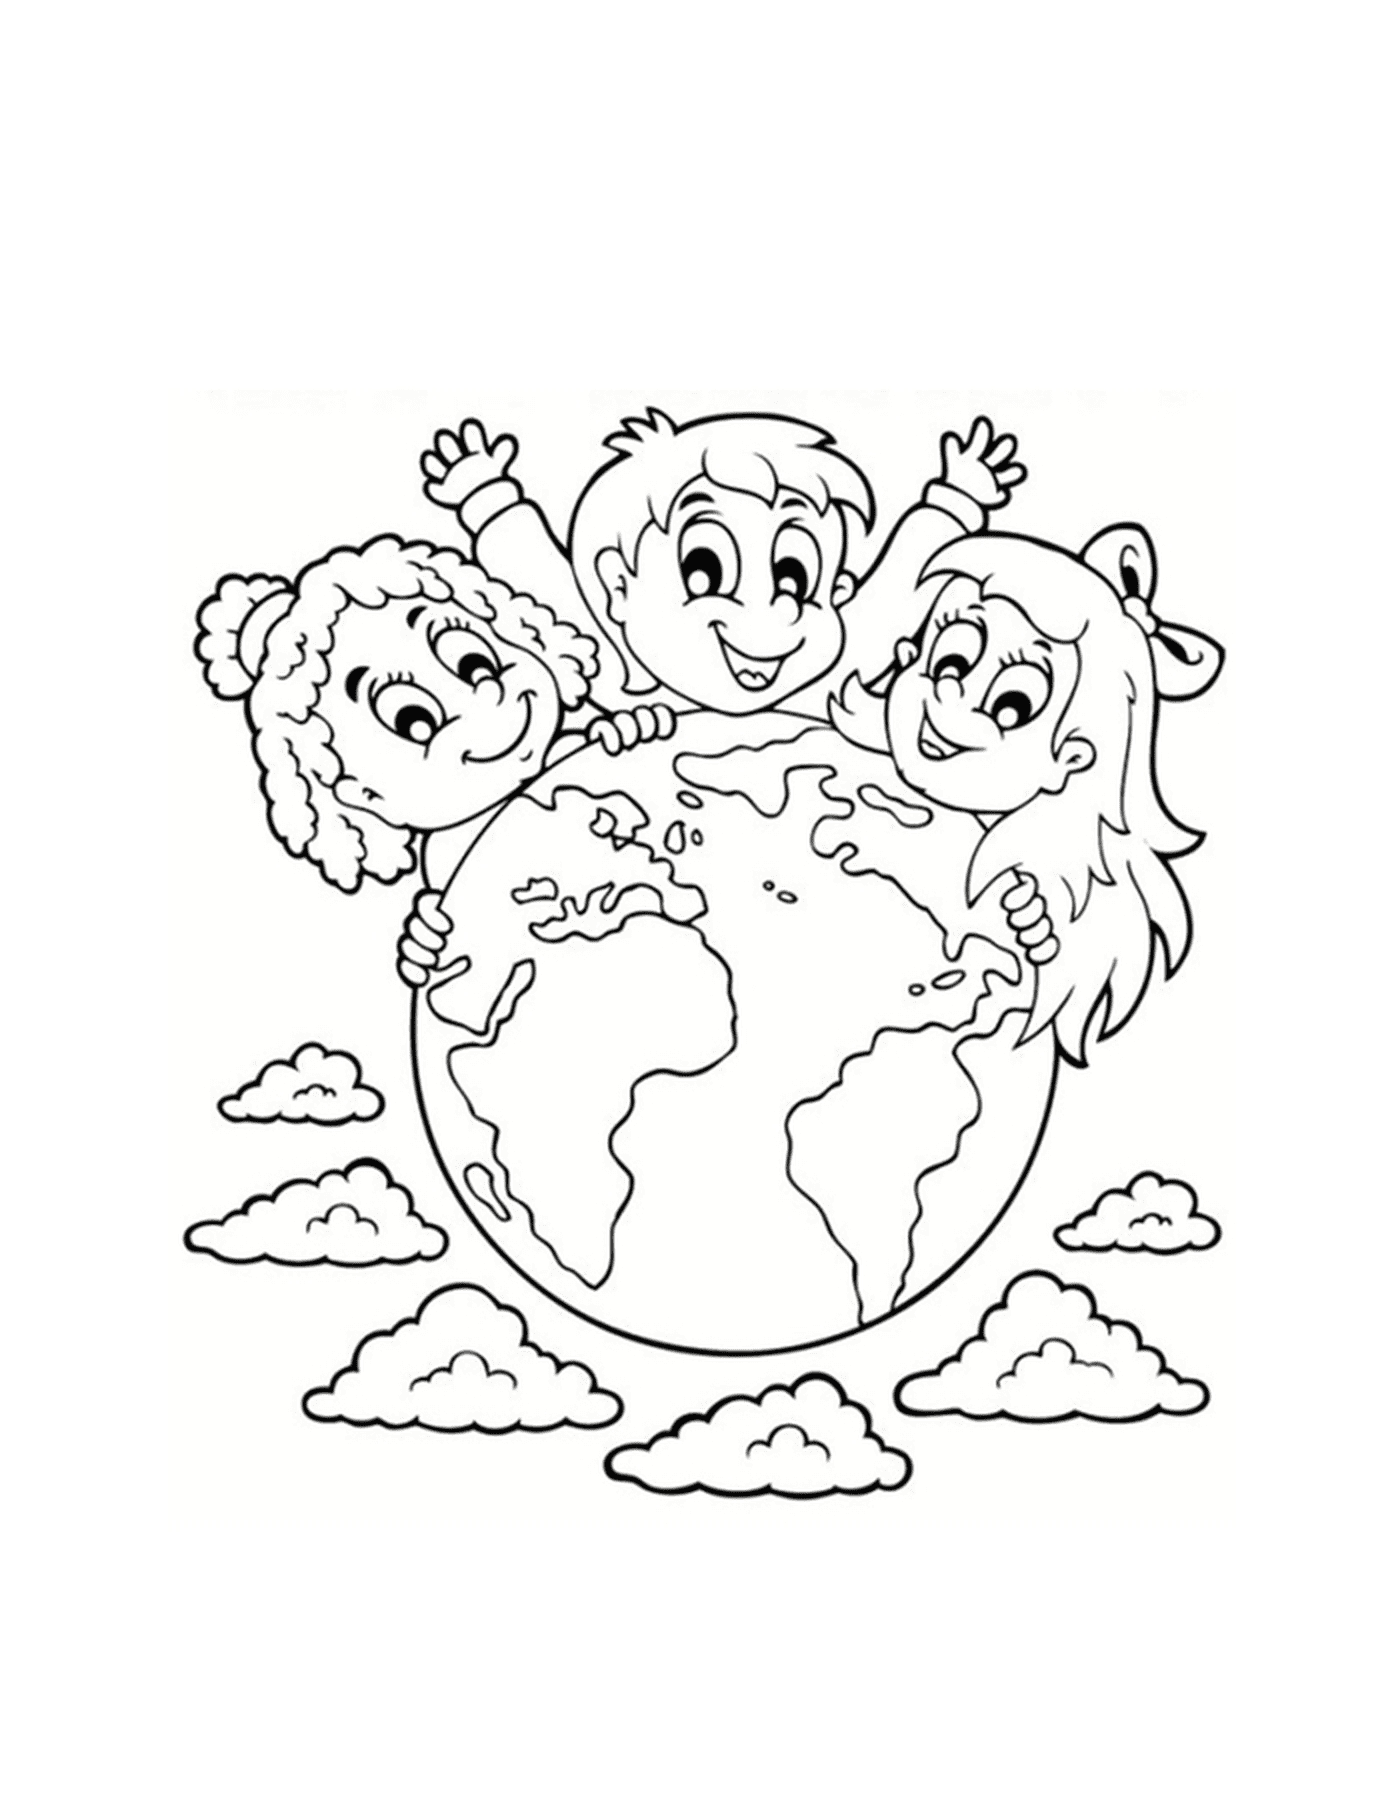  April 22, Earth Day with children 